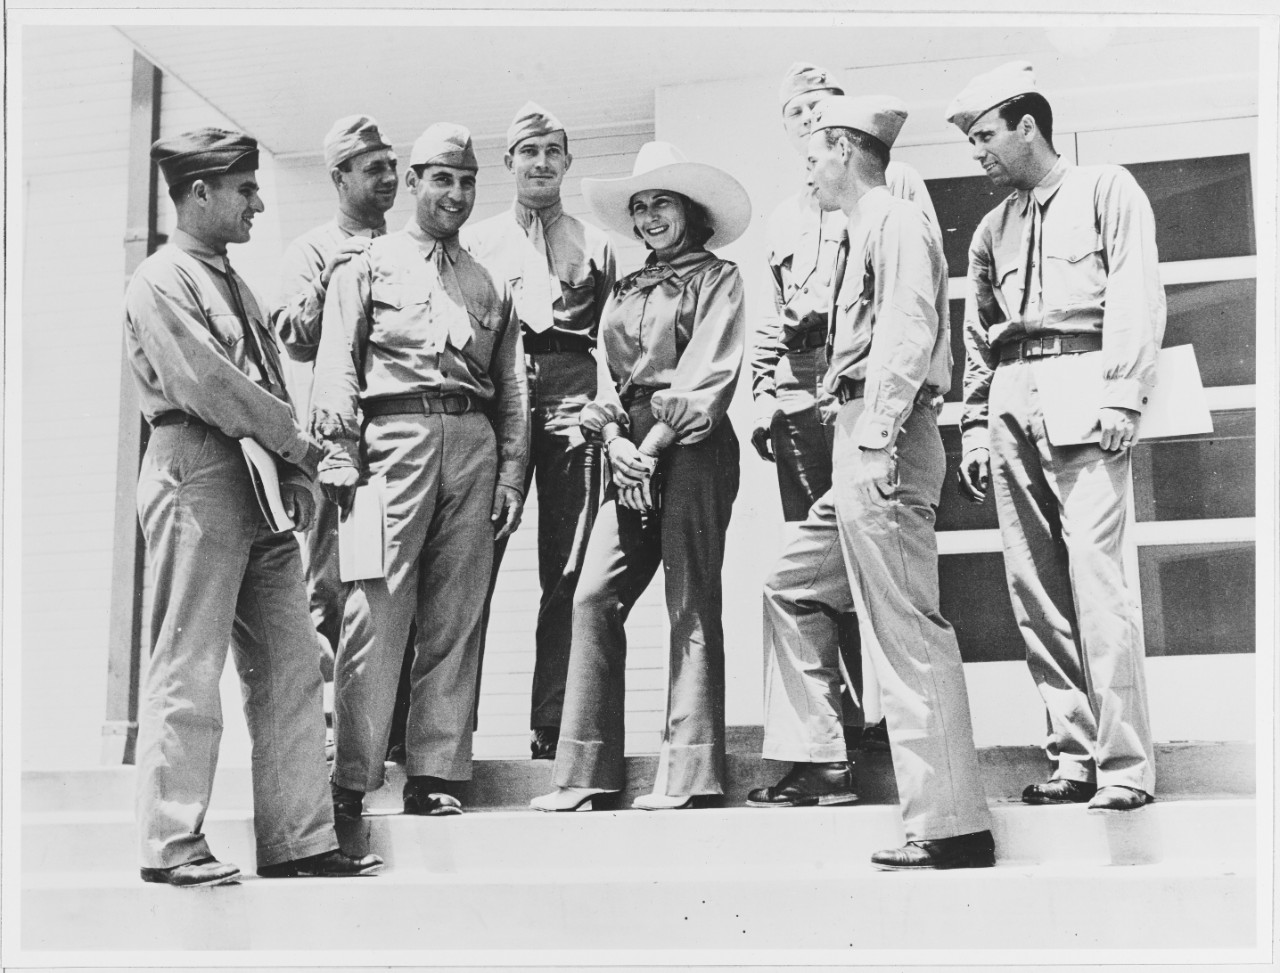 Miss Alice Greenough, International Radio Performer chats with Aviation cadets, May 1, 1941